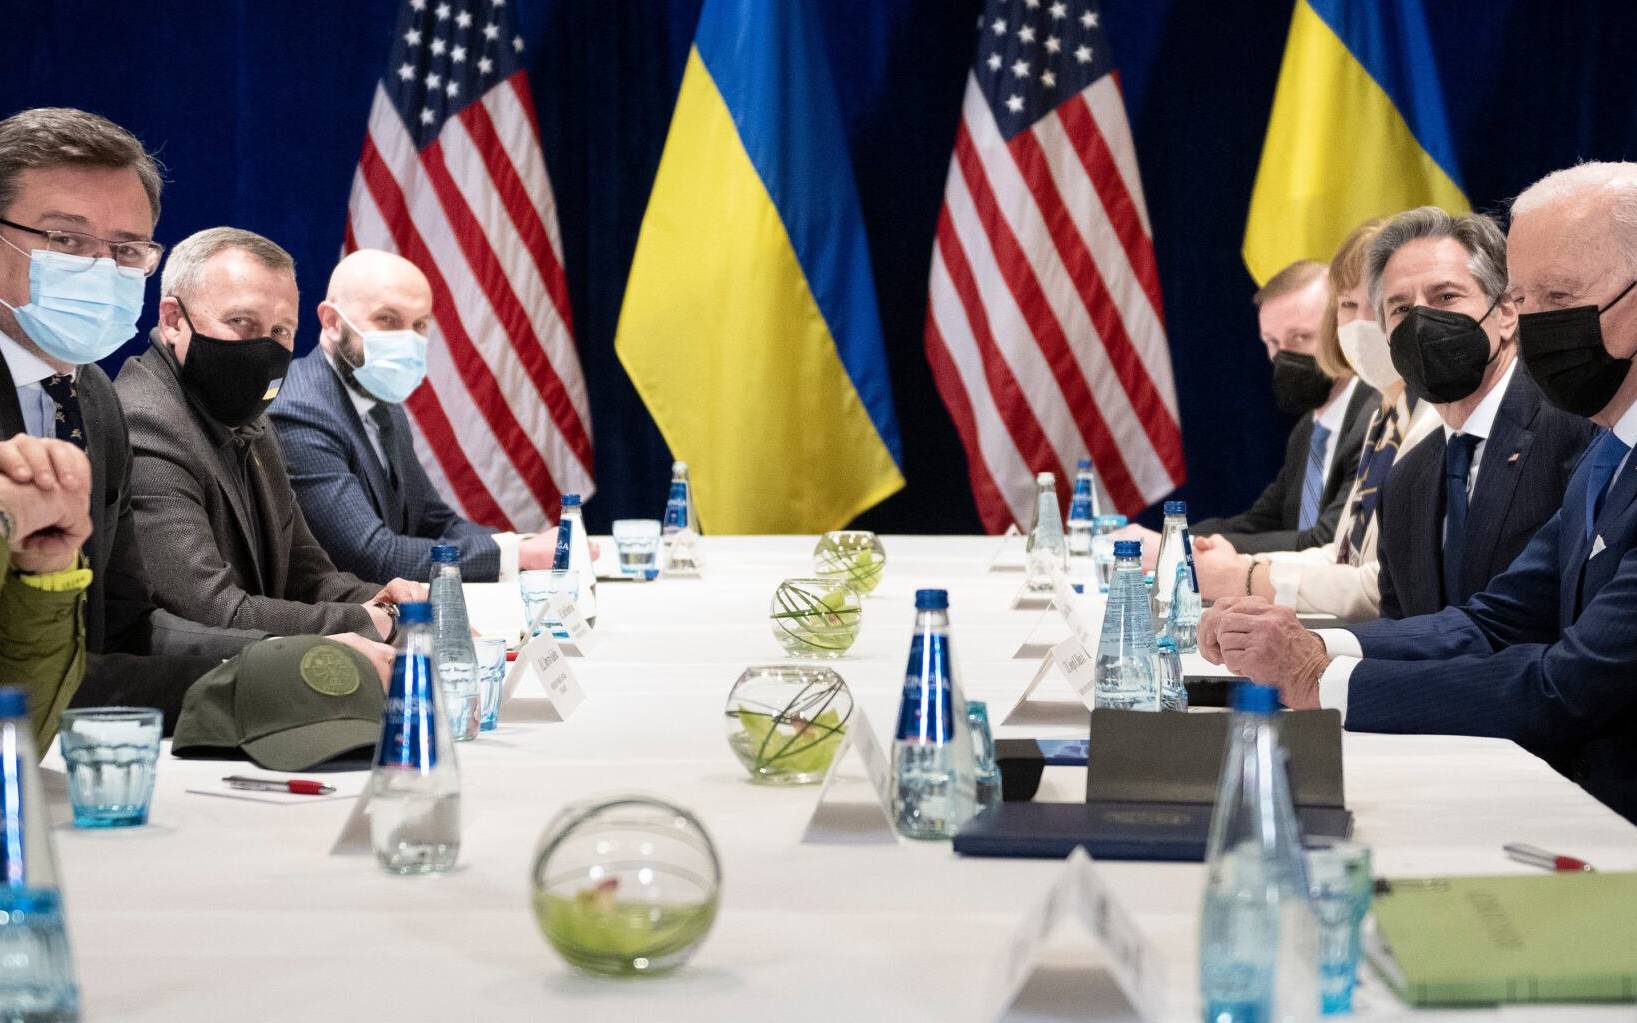 US President Joe Biden (2ndR) together with US Secretary of State Antony Blinken (3rdR) and US Defence Secretary Lloyd Austin (R) attend a meeting on Russia's war in Ukraine with Ukrainian Foreign Minister Dmytro Kuleba (2ndL) and Ukrainian Defence Minister Oleksii Reznikov (L) in Warsaw on March 26, 2022. (Photo by Brendan Smialowski / AFP)